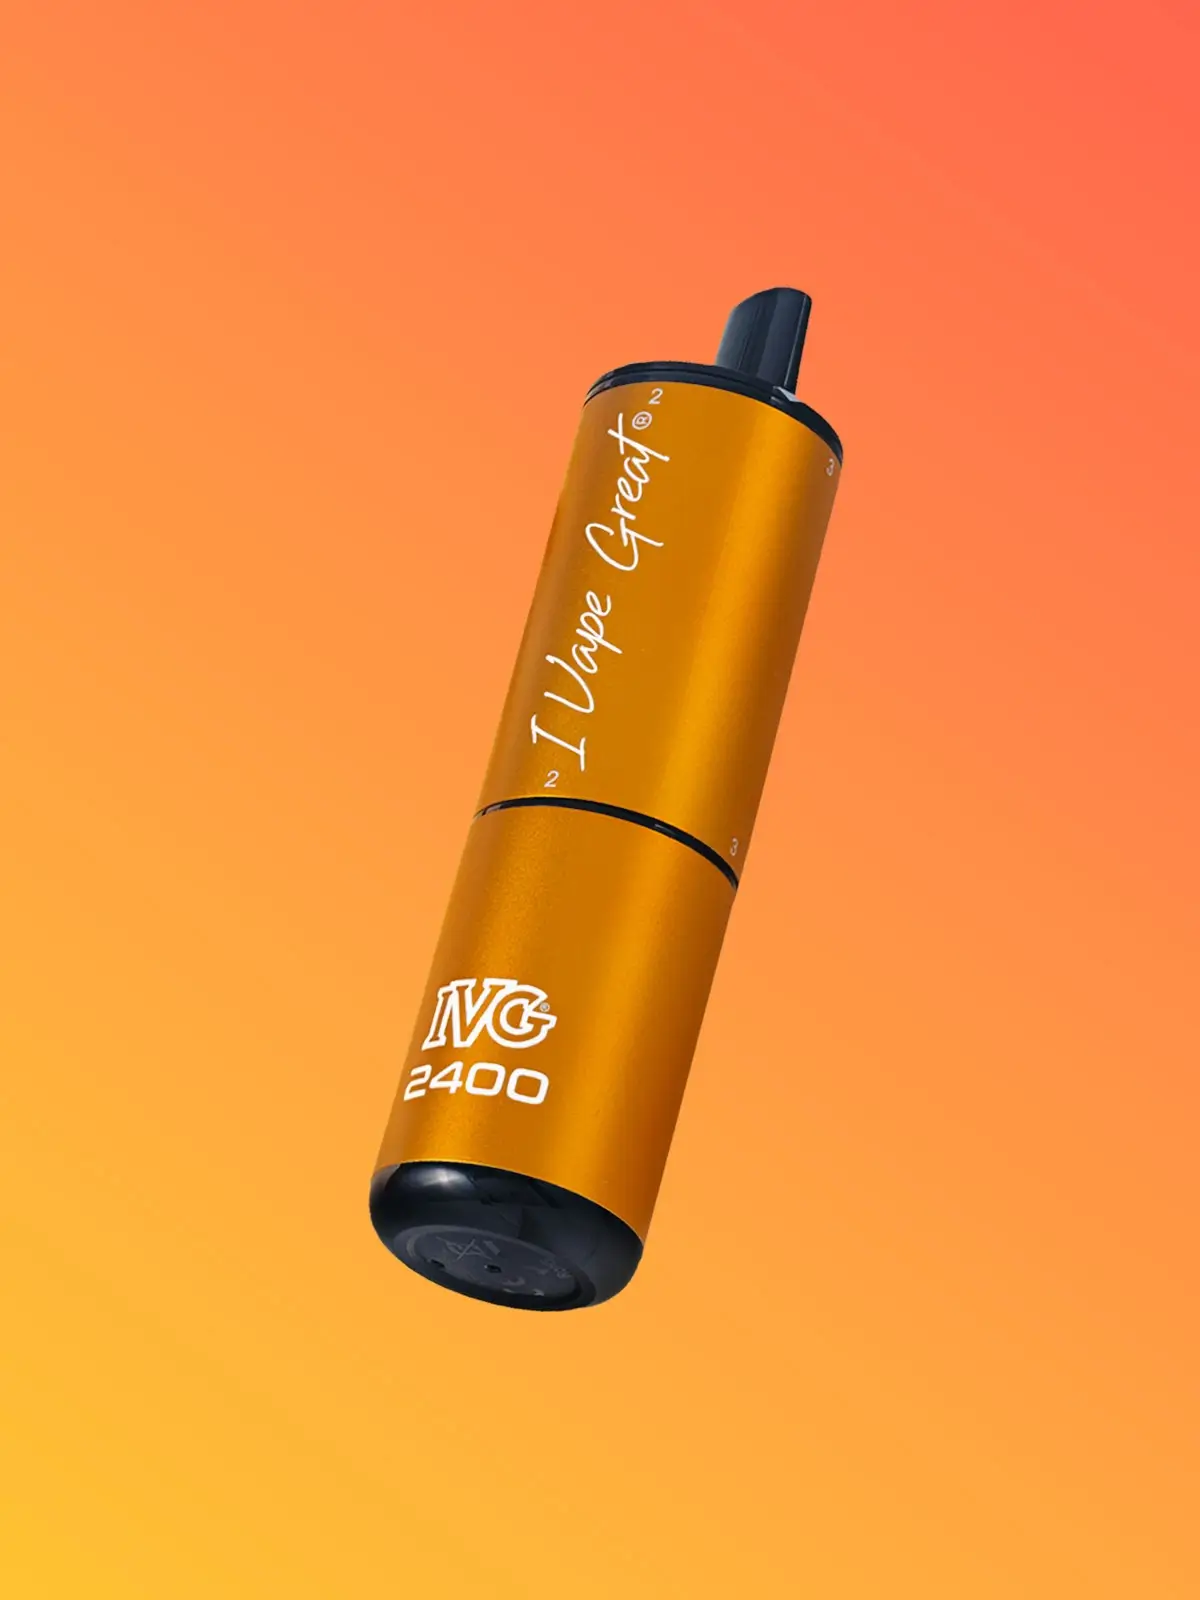 An IVG 2400 disposable vape in Exotic Edition flavour. Floating in front of an orange background.